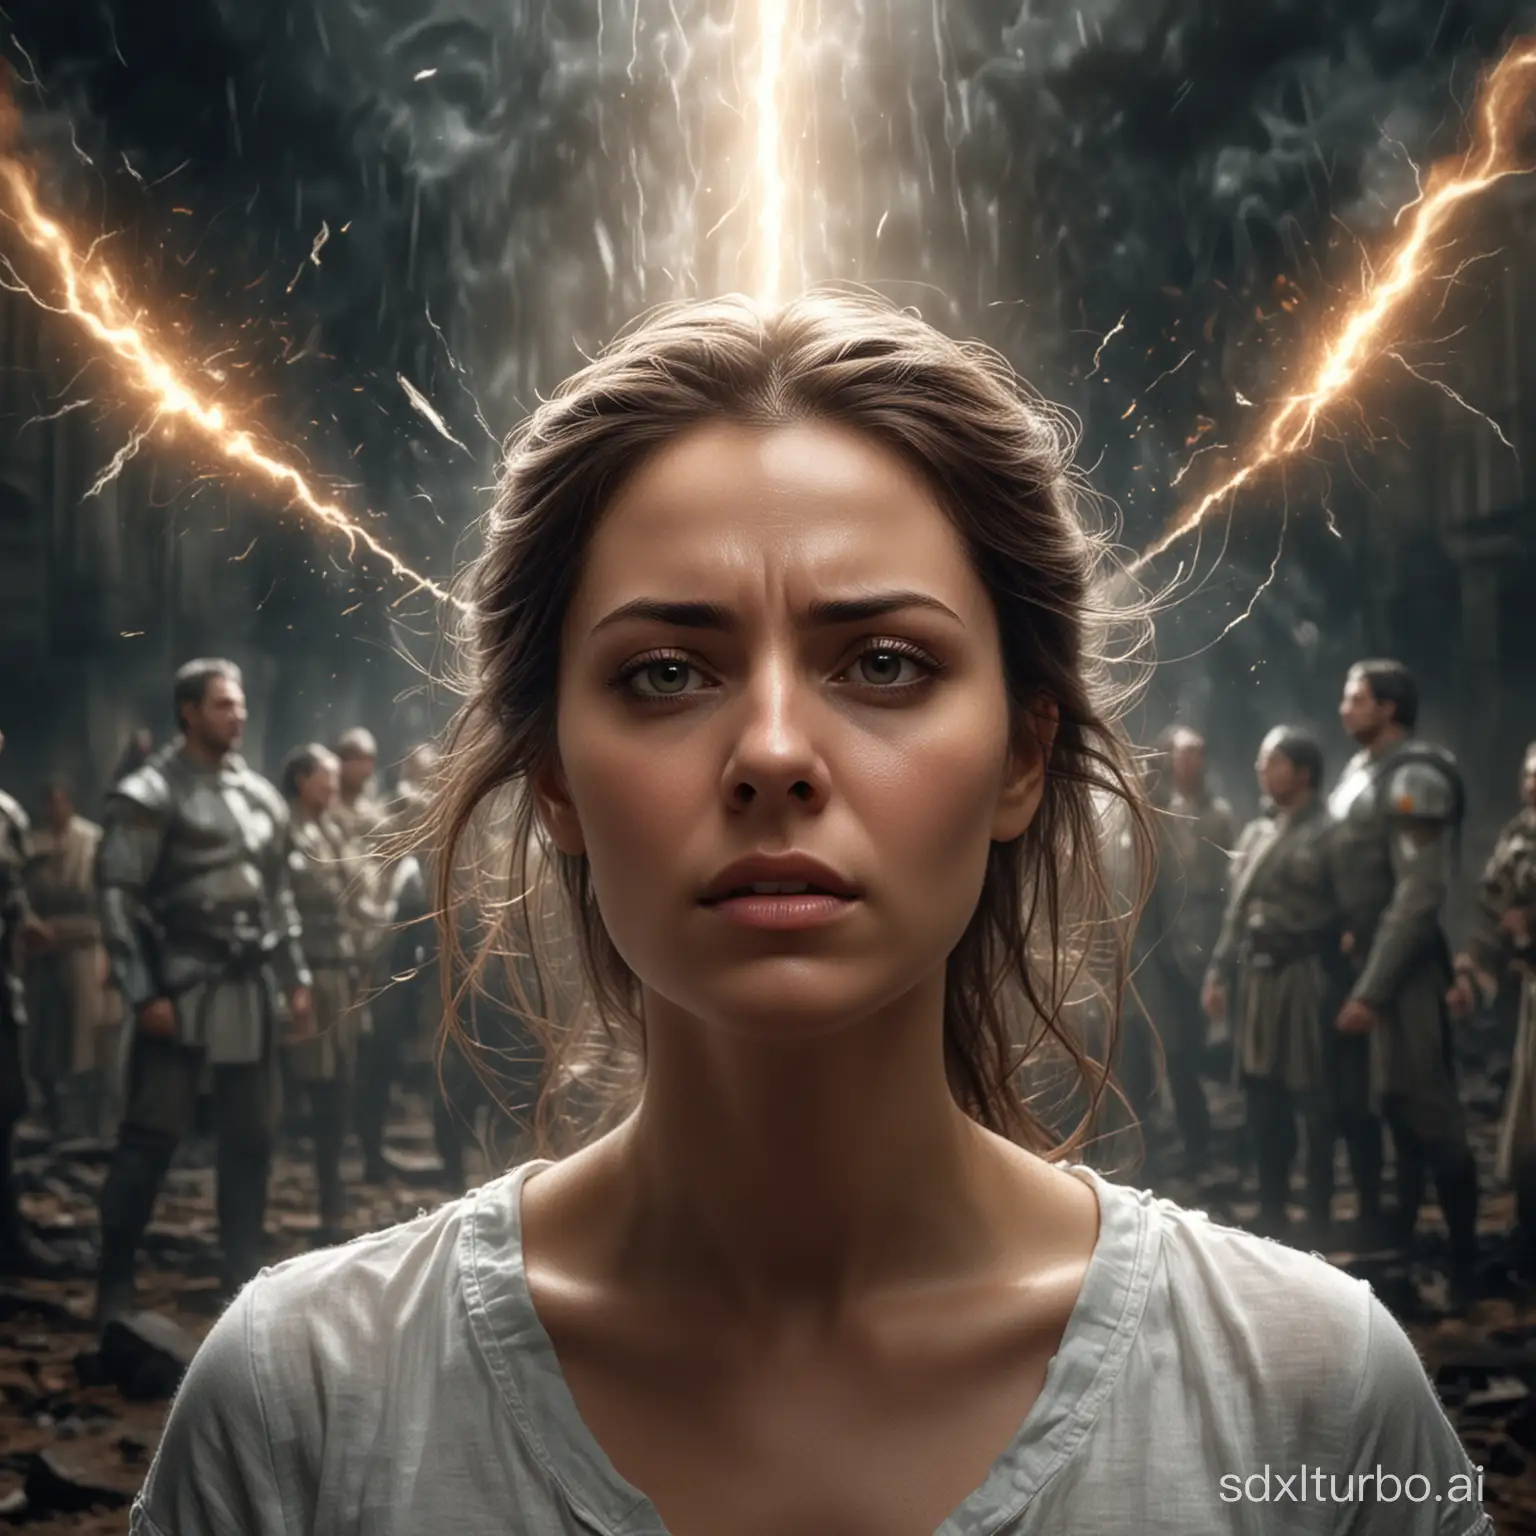 A beautiful woman who is troubled in the foreground, with a spiritual battle between light and dark forces over her mind in the background. The battle is epic the picture is a masterpiece. The foreground is photo realistic.